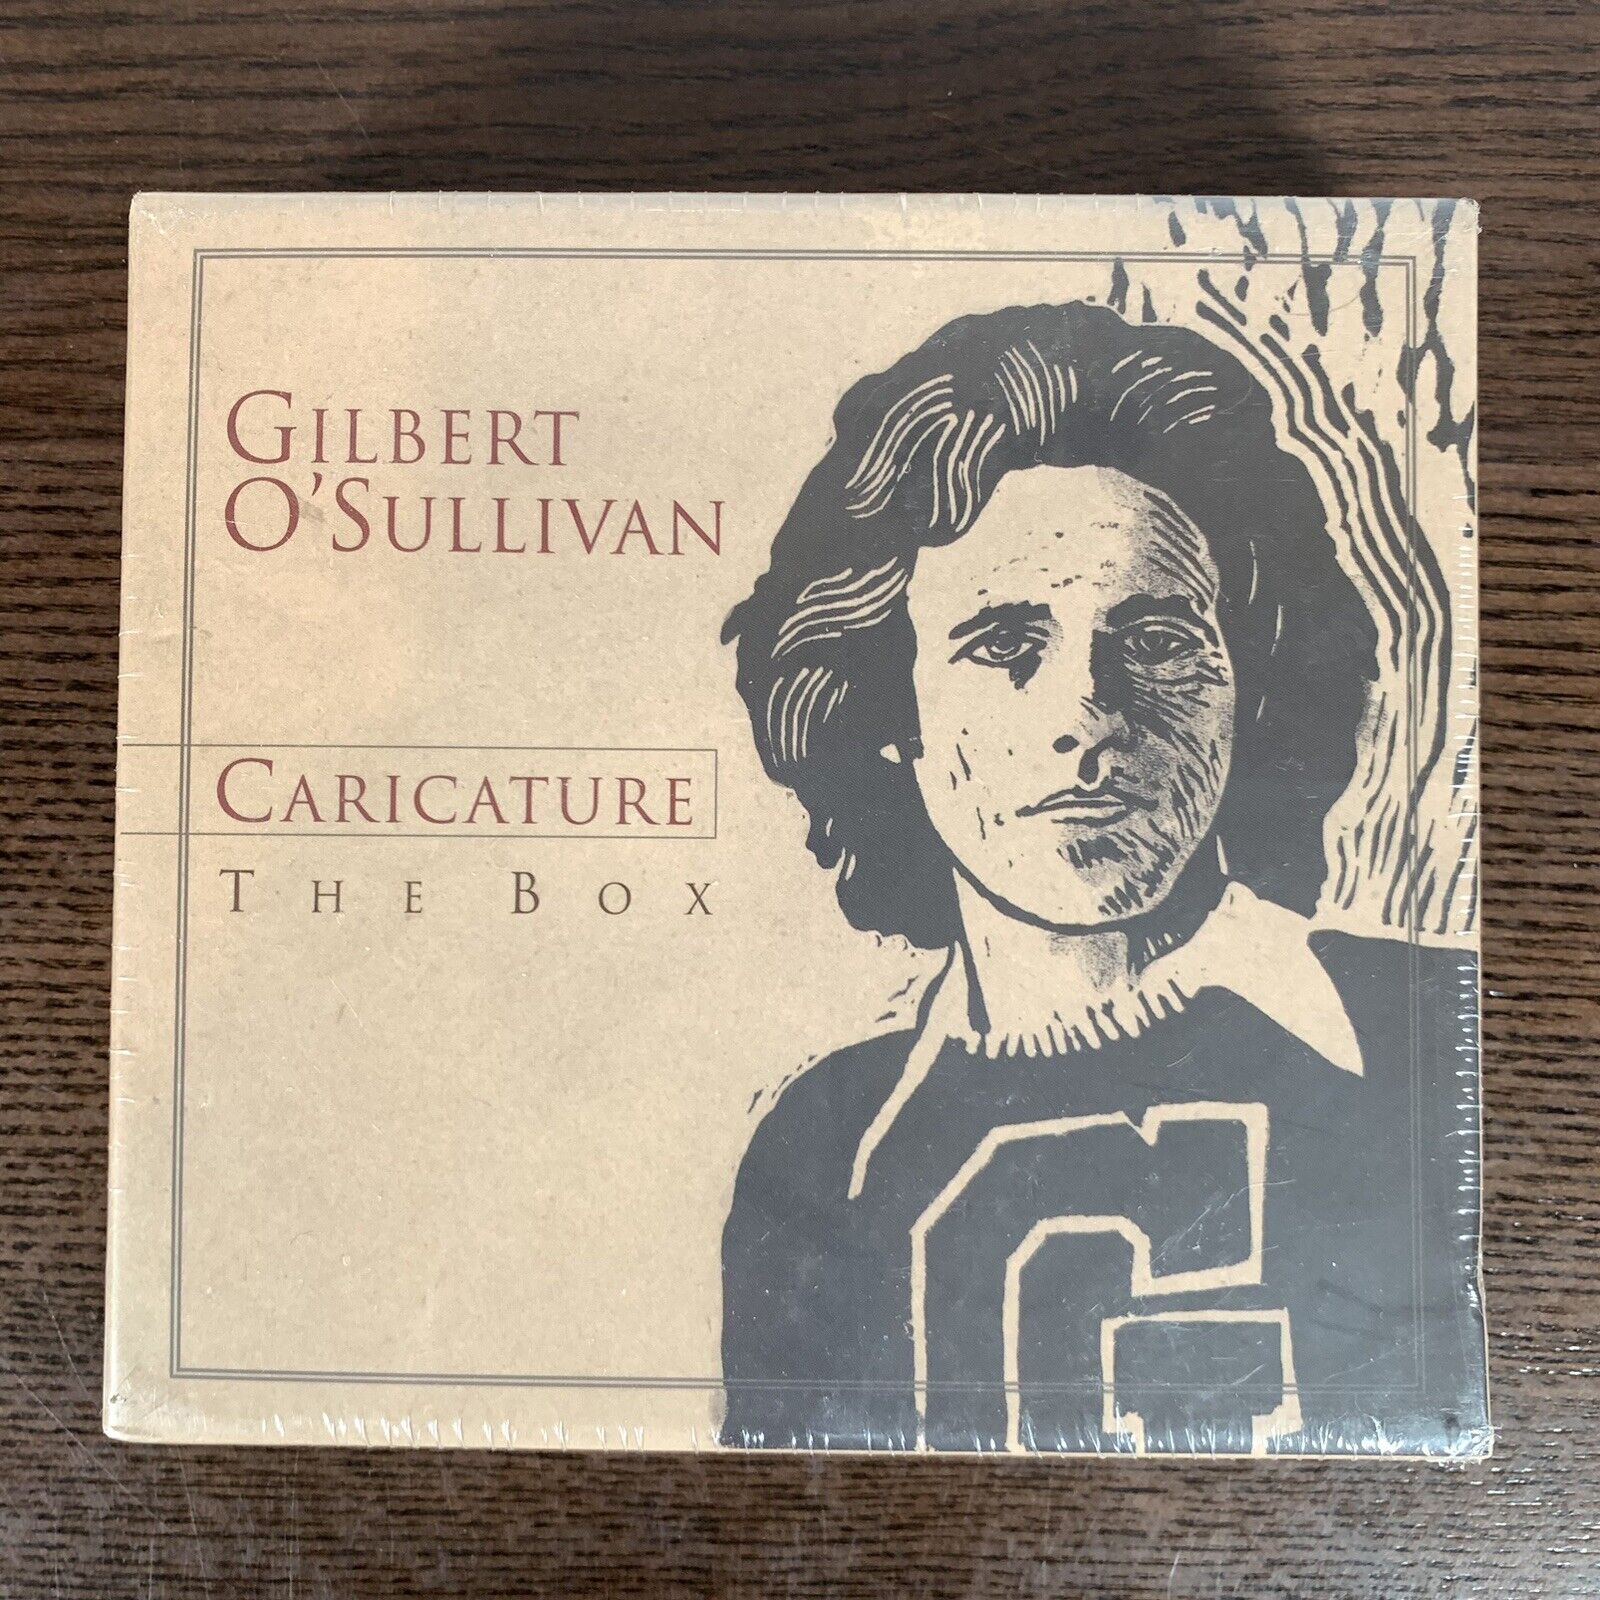 Gilbert O'Sullivan Caricature The Box New and Sealed 3 CD Set